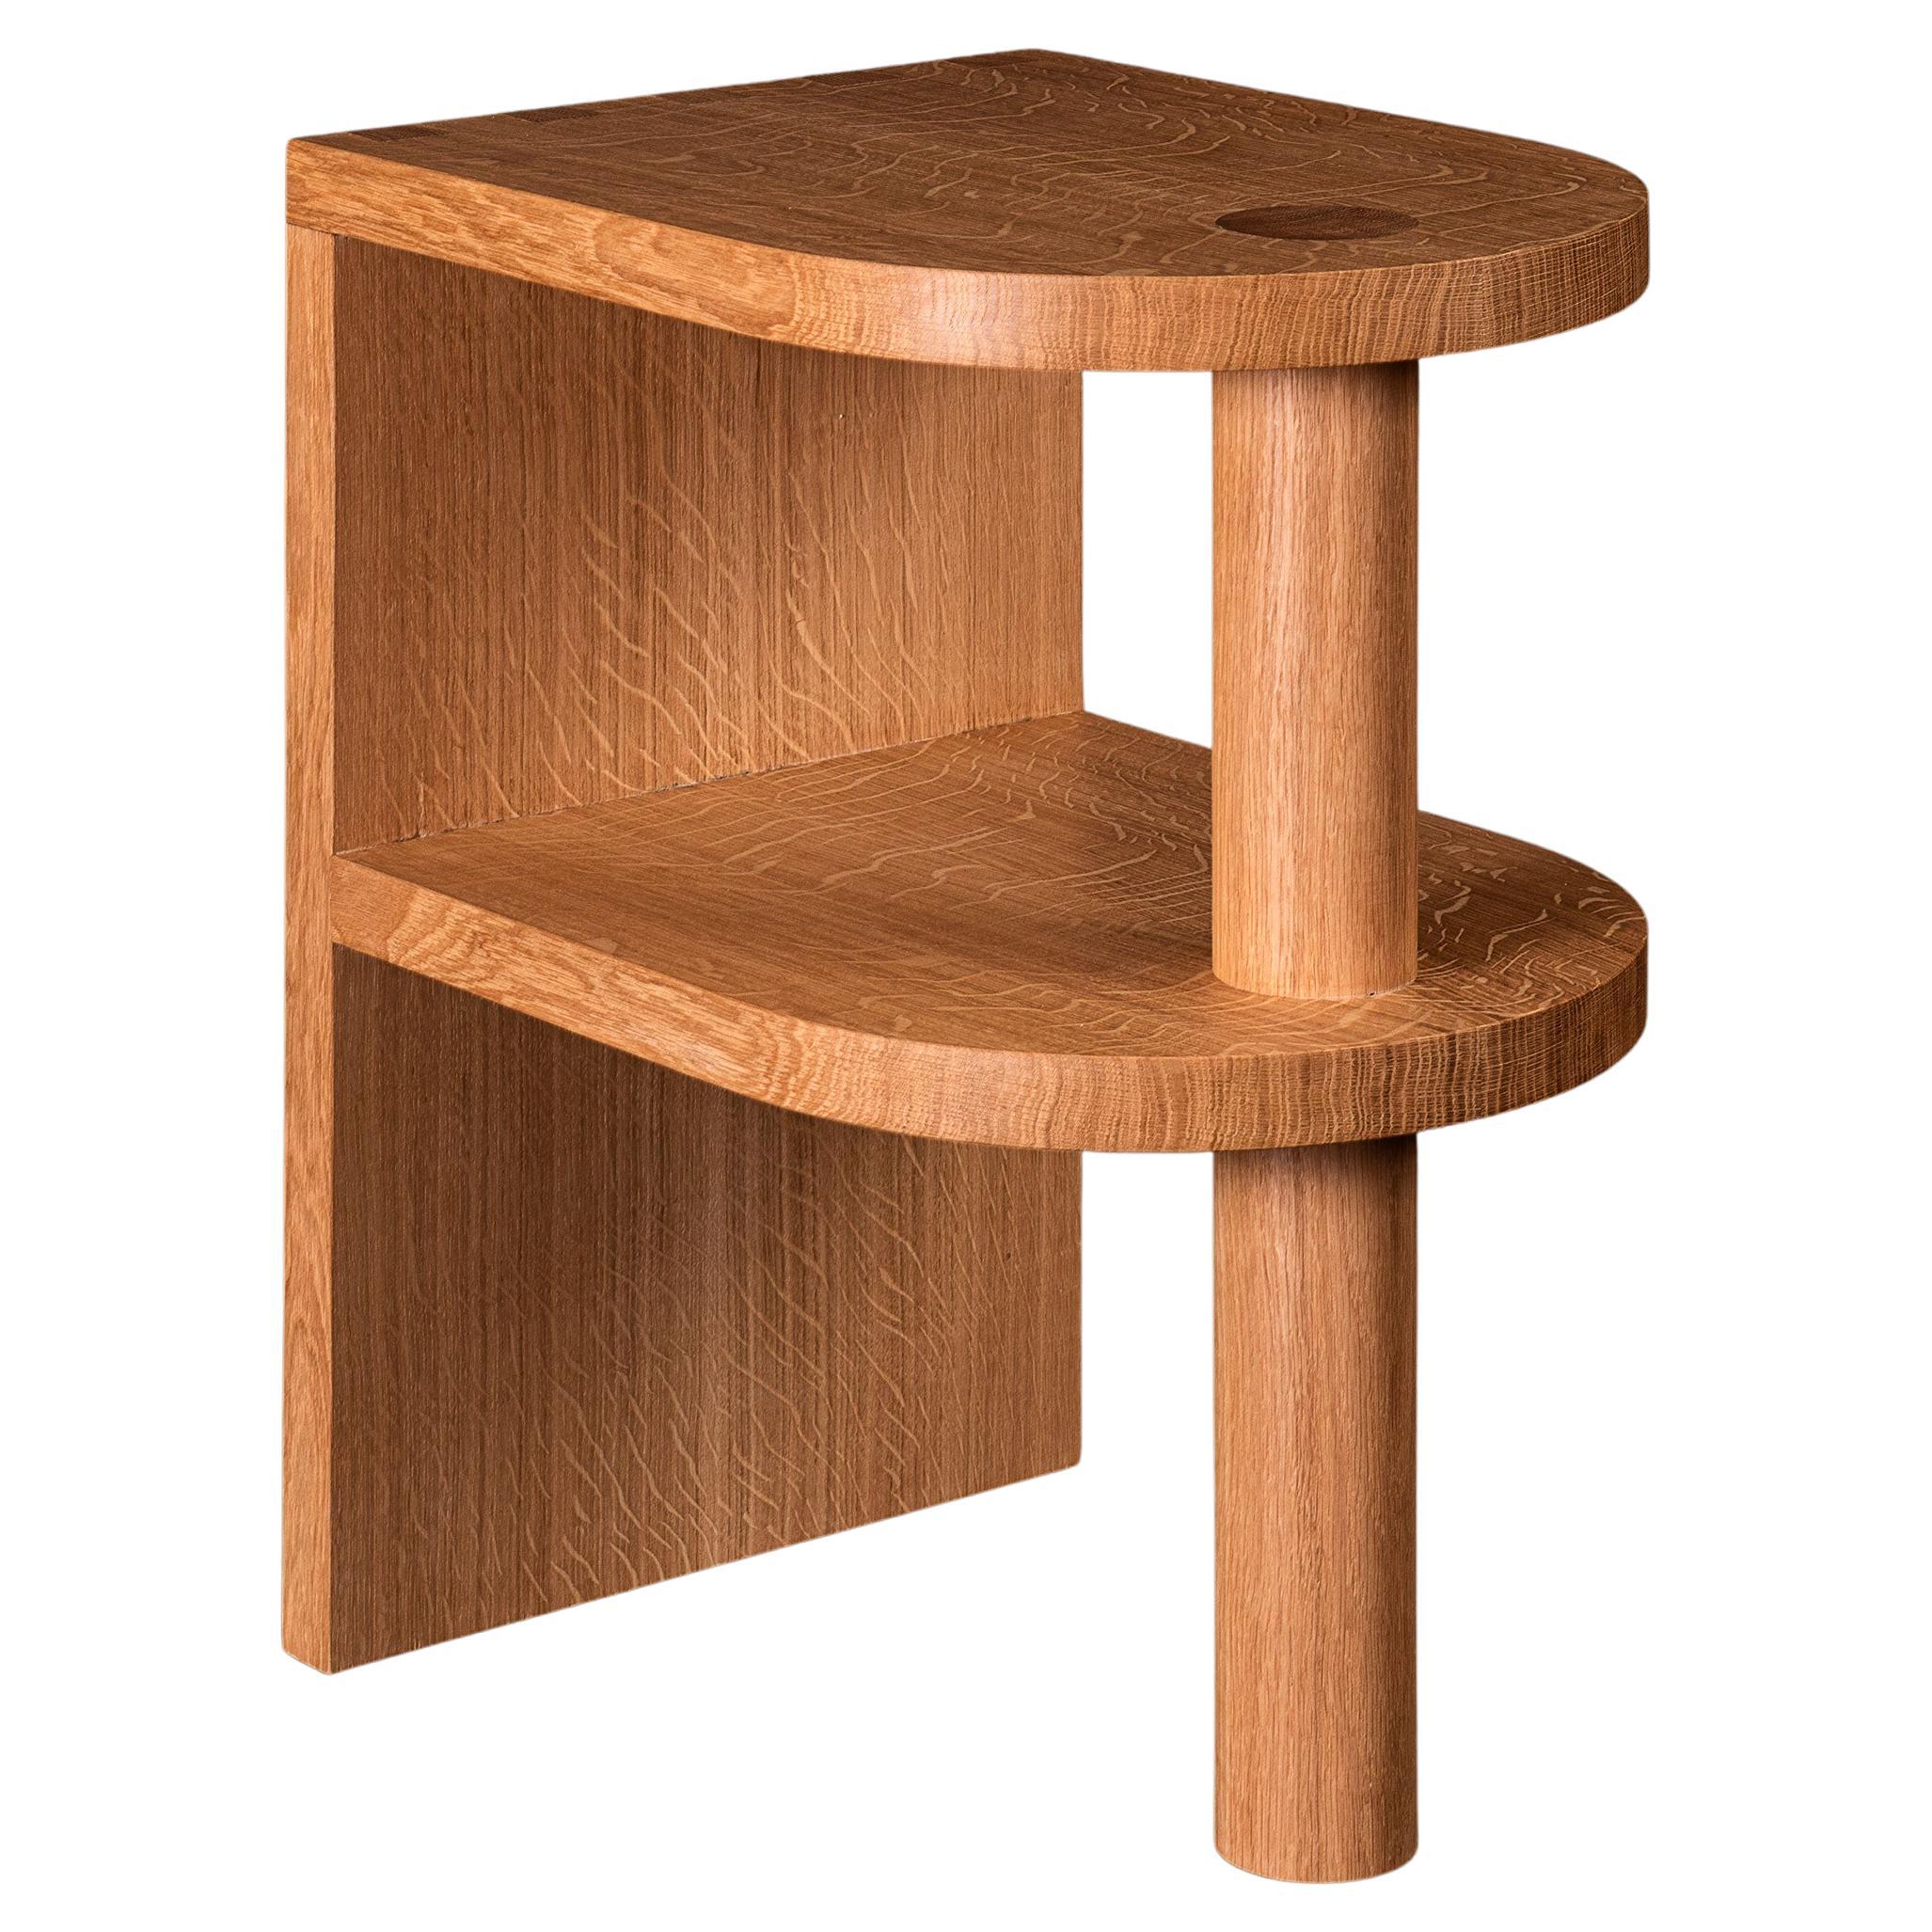 A Larger and adapted version of our architectural postmodern oak pillar nightstands or end tables. Designed and handcrafted in England using traditional woodwork techniques with the most beautiful and finest English quartersawn oak. Hand-cut large